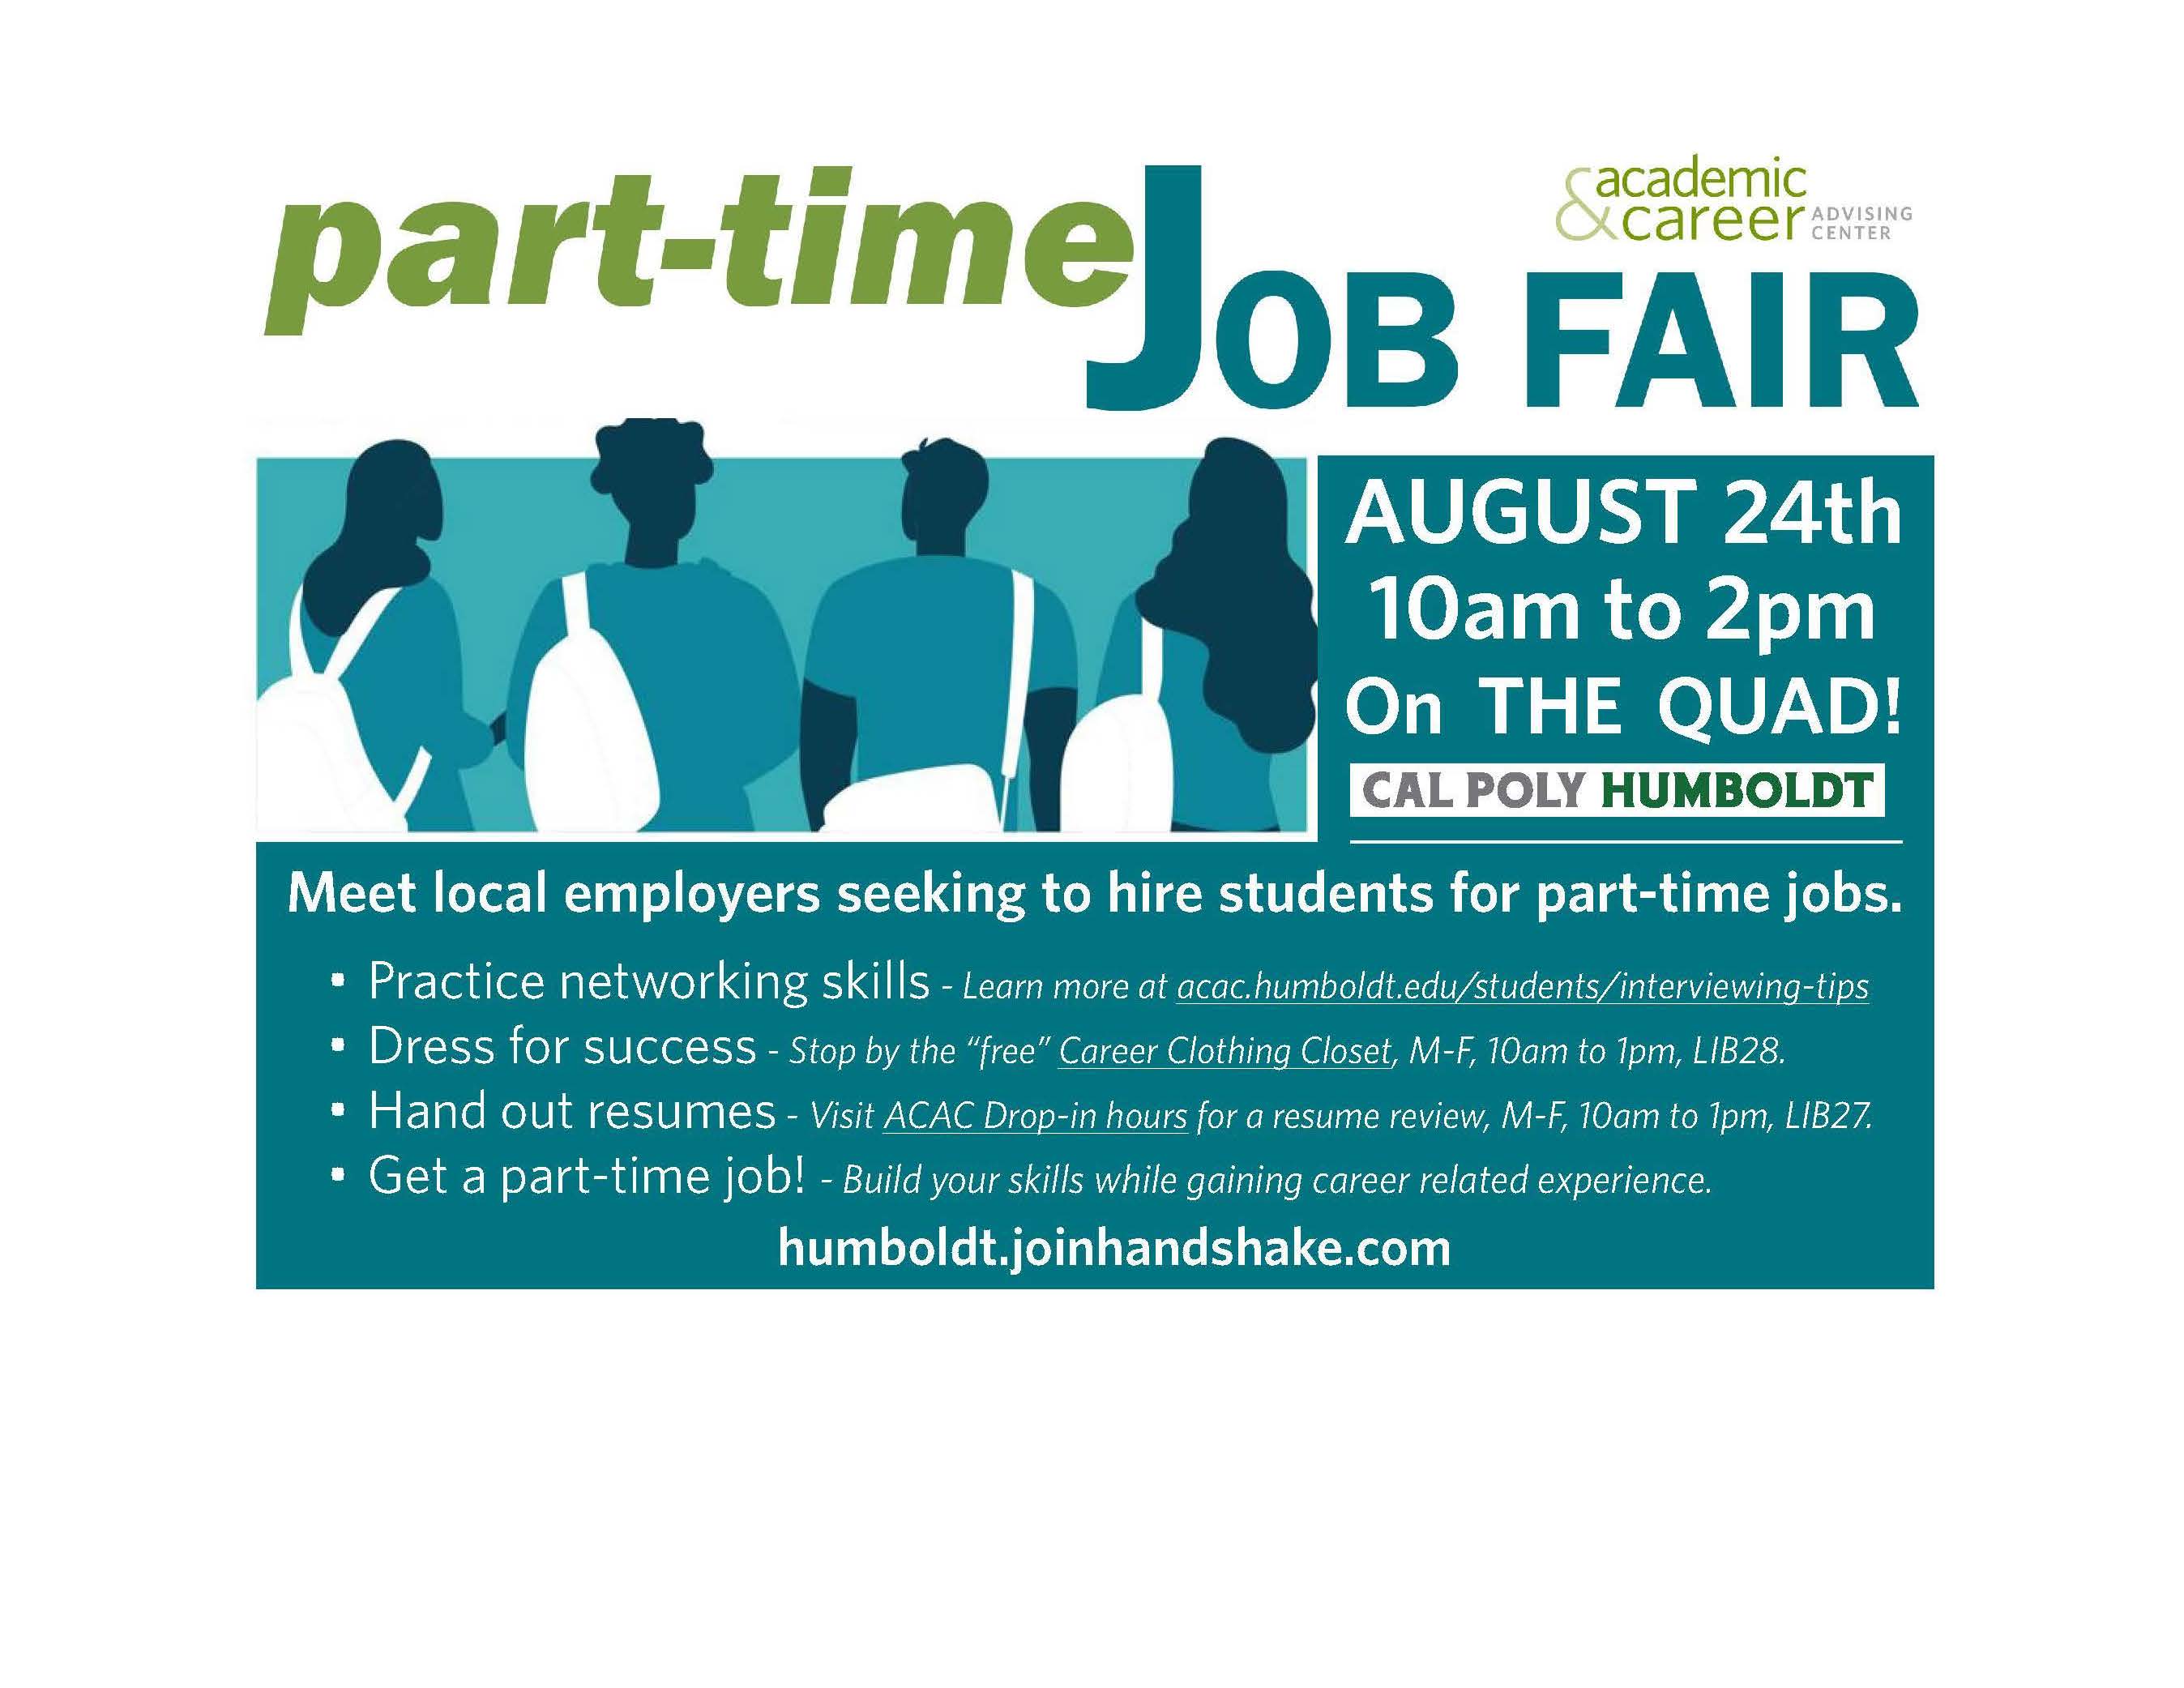 Part-time Job Fair, Wednesday, August 24, 10am to 2pm, on the Quad